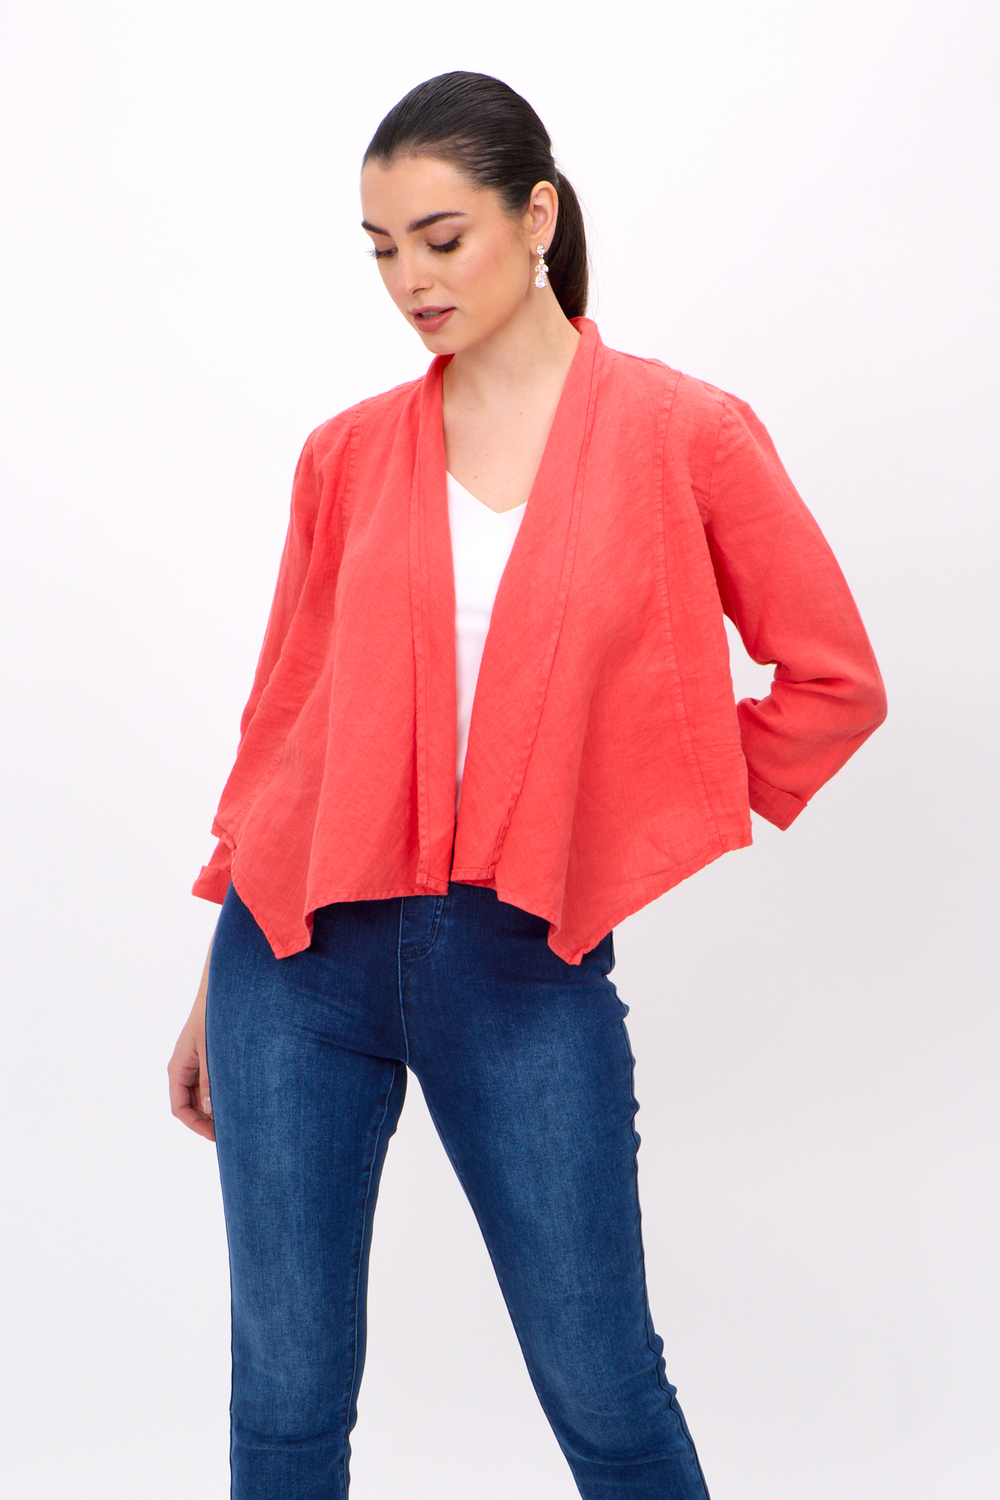 Dolcezza Woven Cardigan Style 24251. Coral